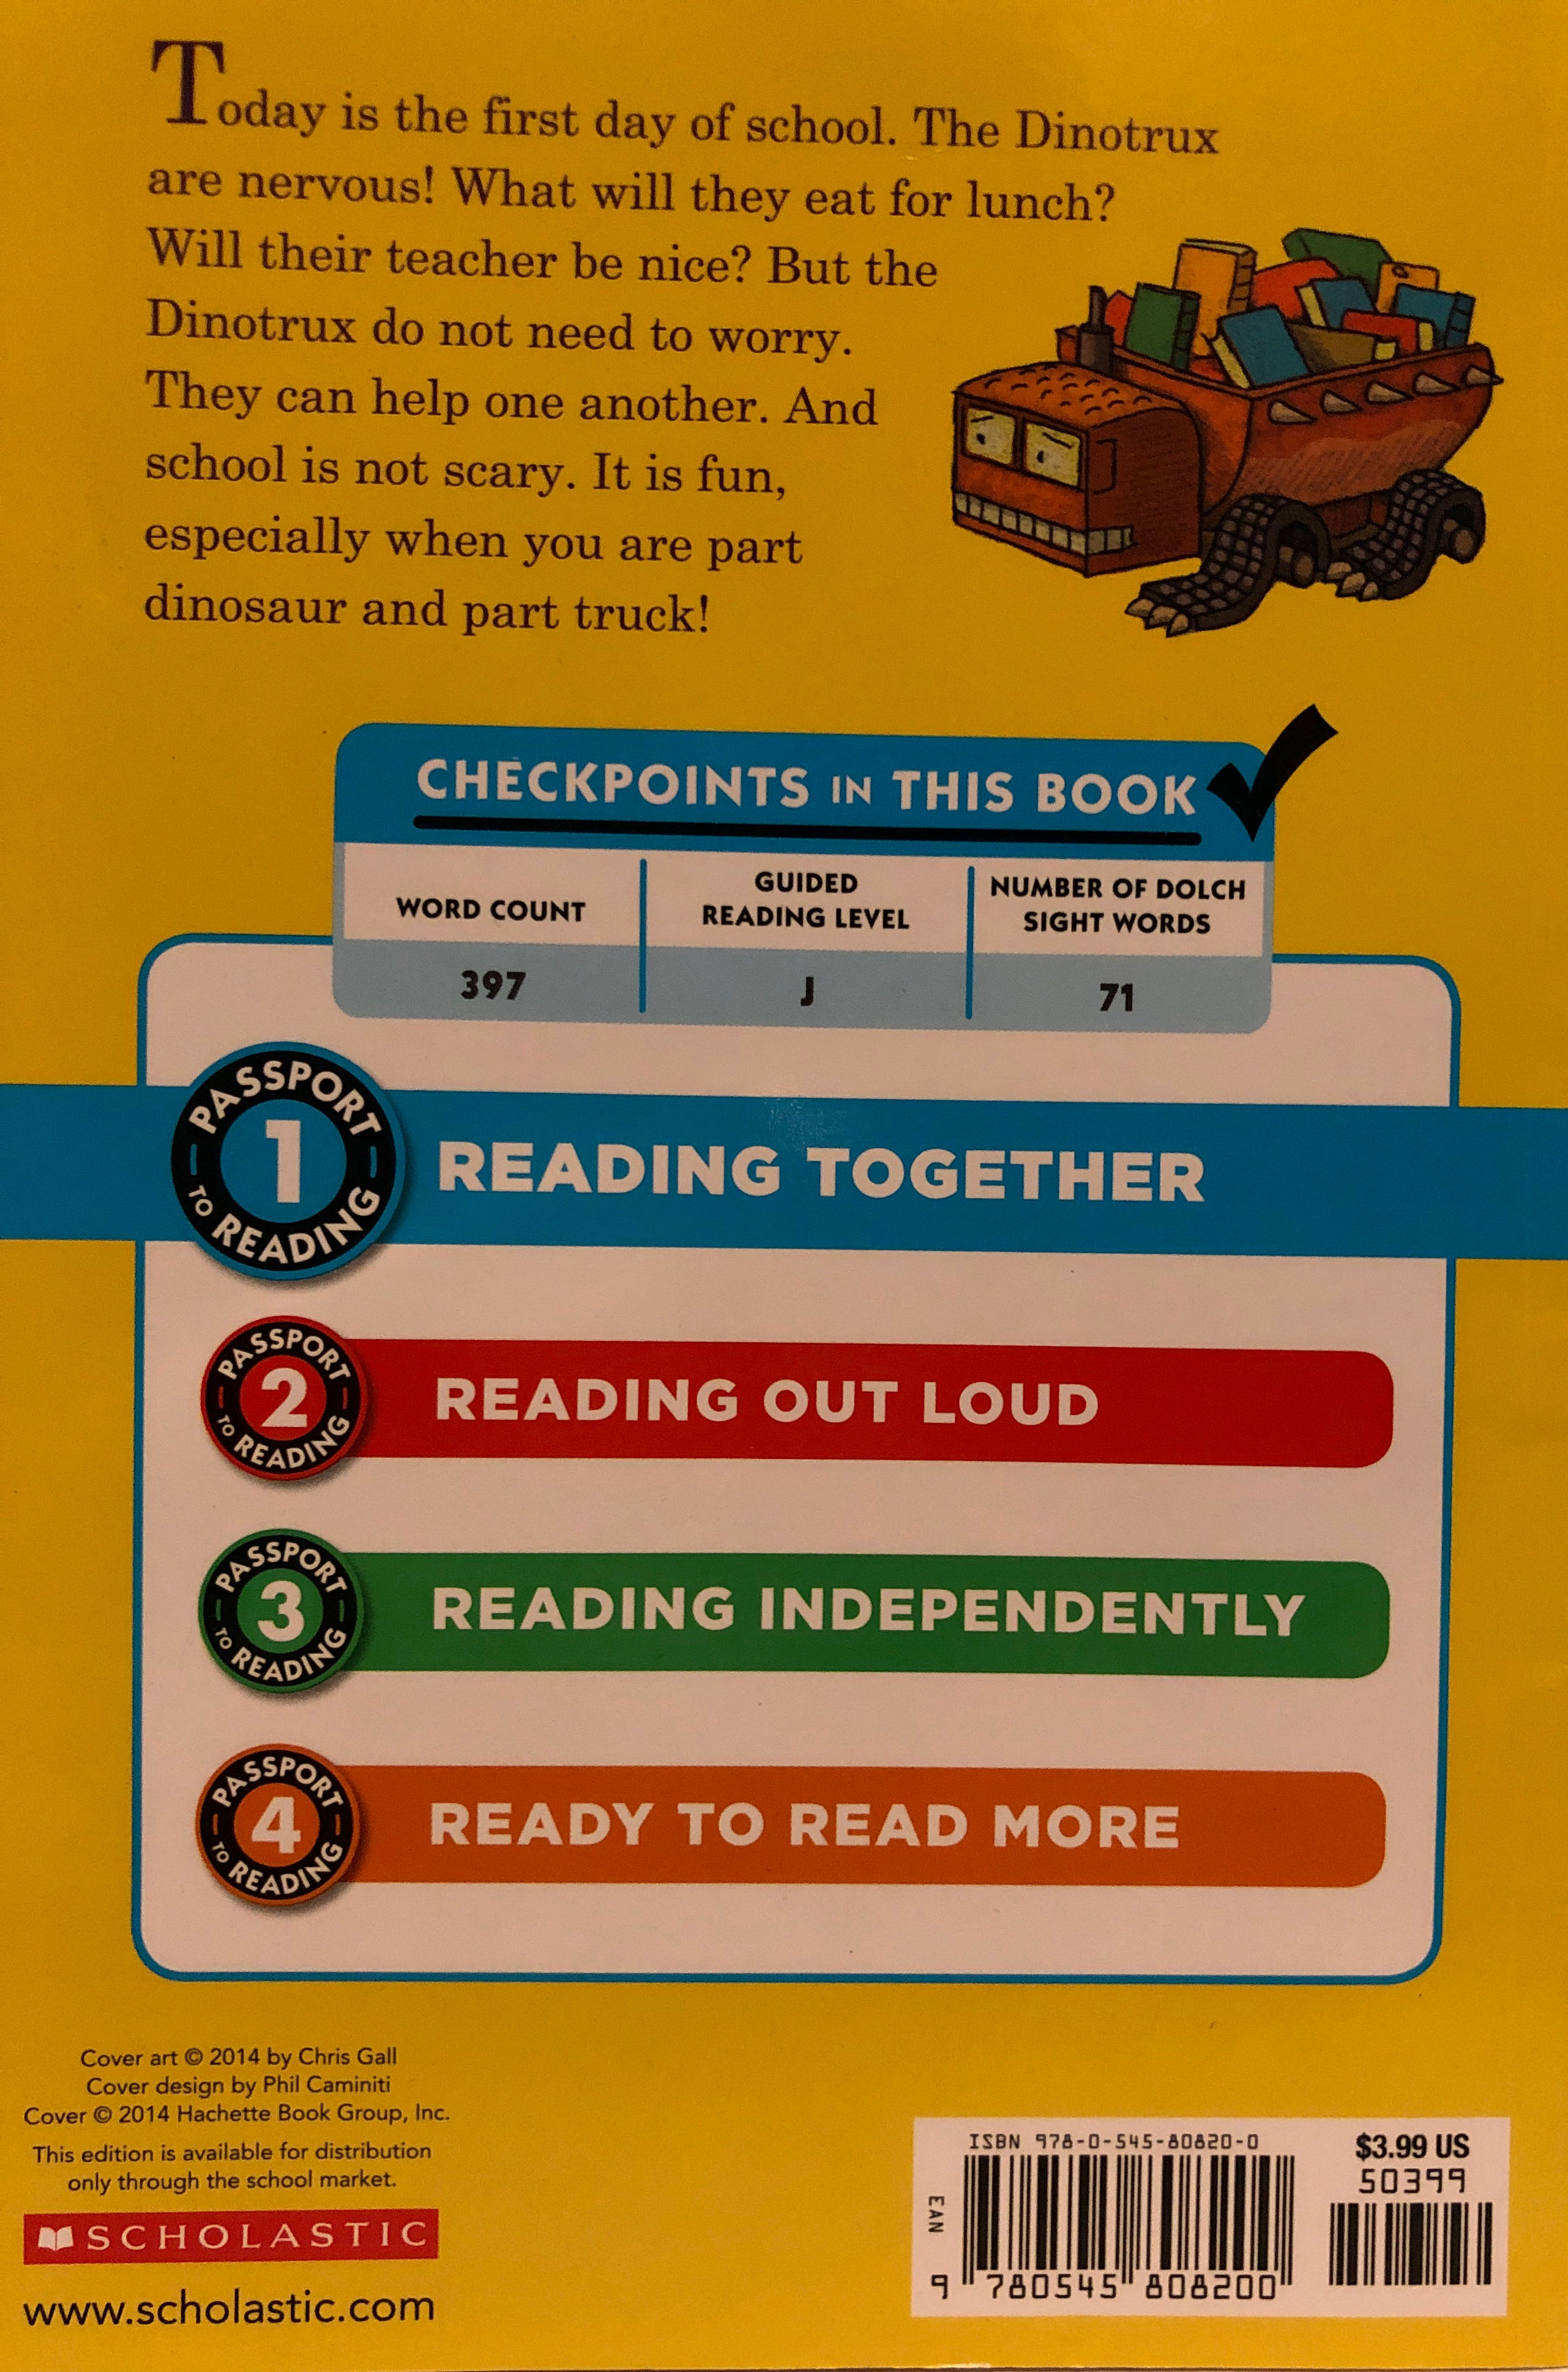 Dinotrux Go To School - Chris Gall (Scholastic Inc - Paperback) book collectible [Barcode 9780545808200] - Main Image 2